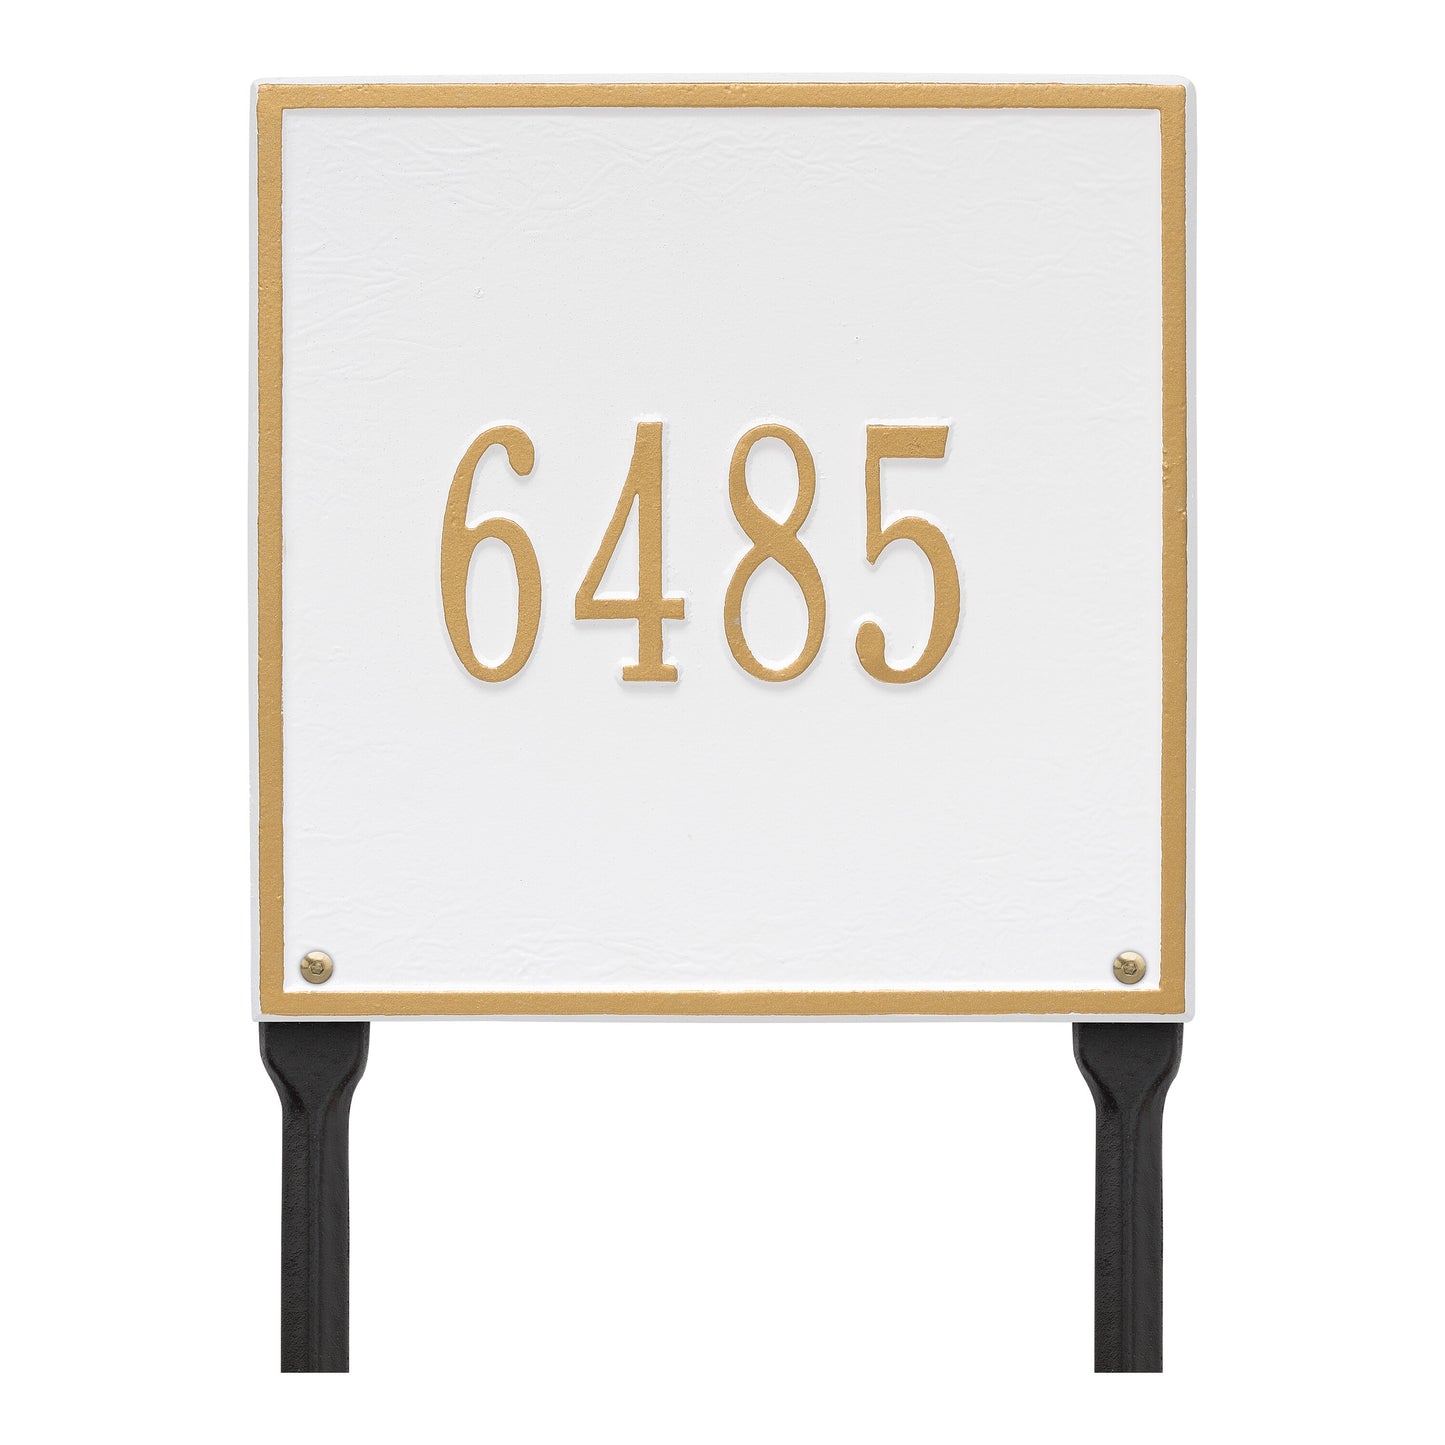 Whitehall Products Personalized Square Standard Lawn Plaque One Line 